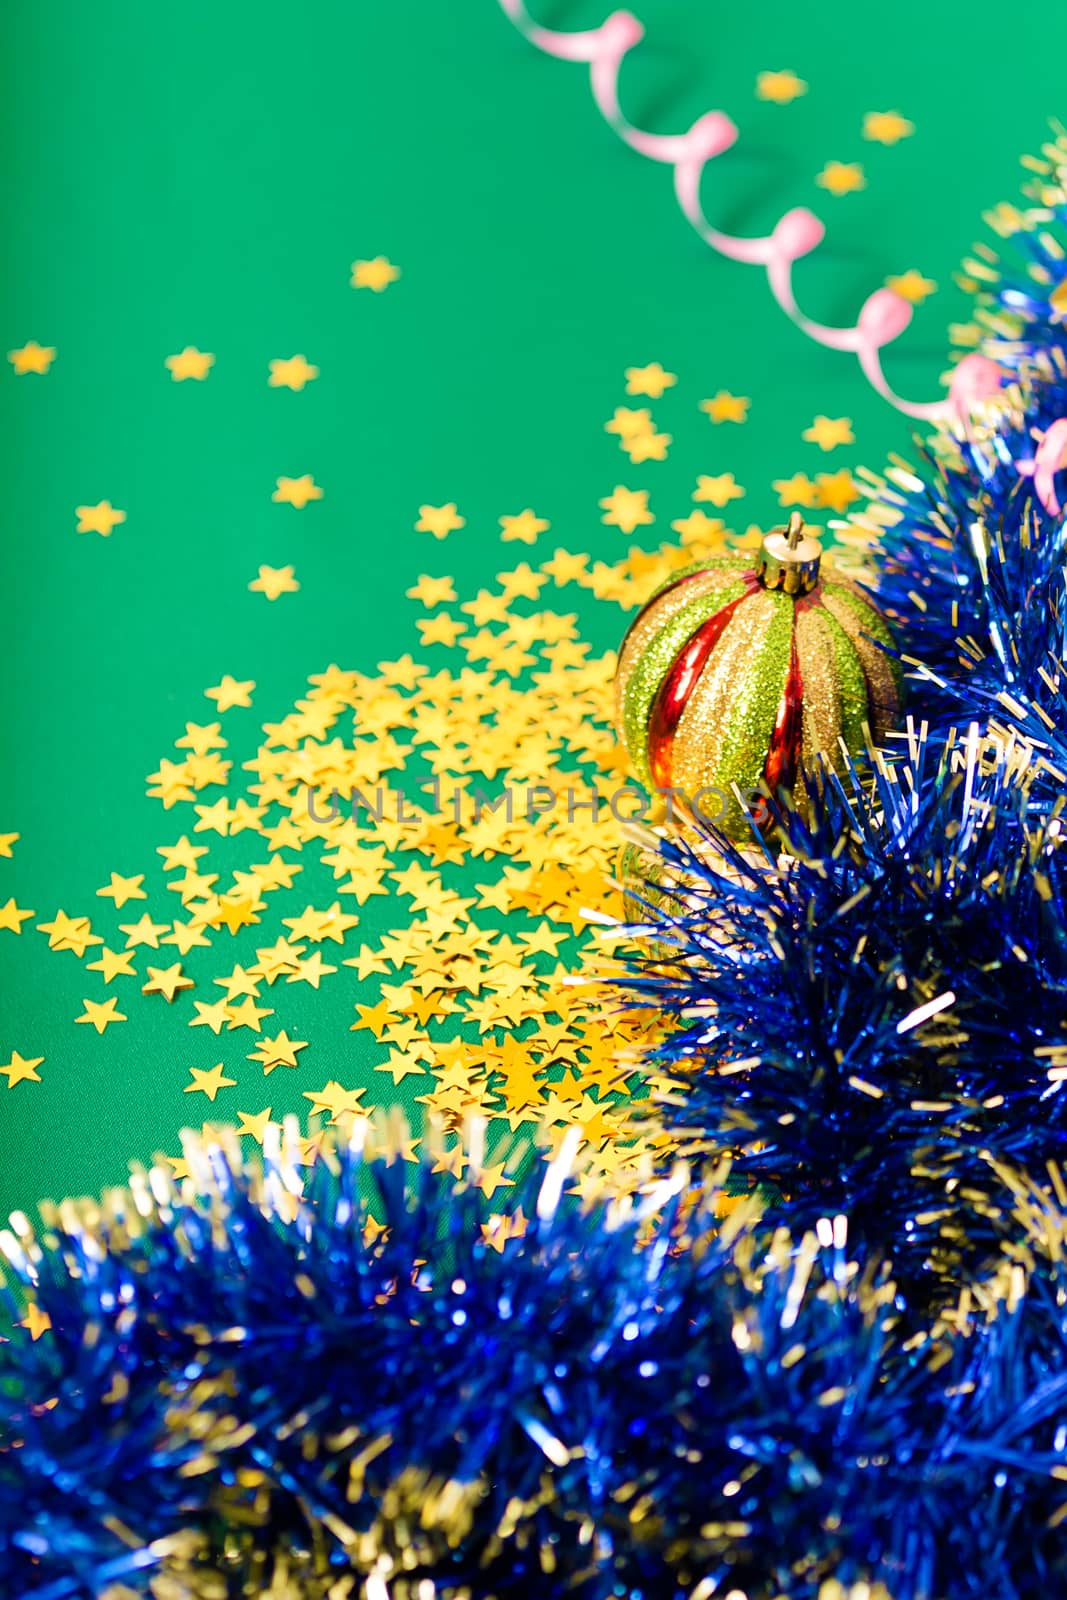 Christmas card. Stars and Christmas decorations on a green by pzRomashka